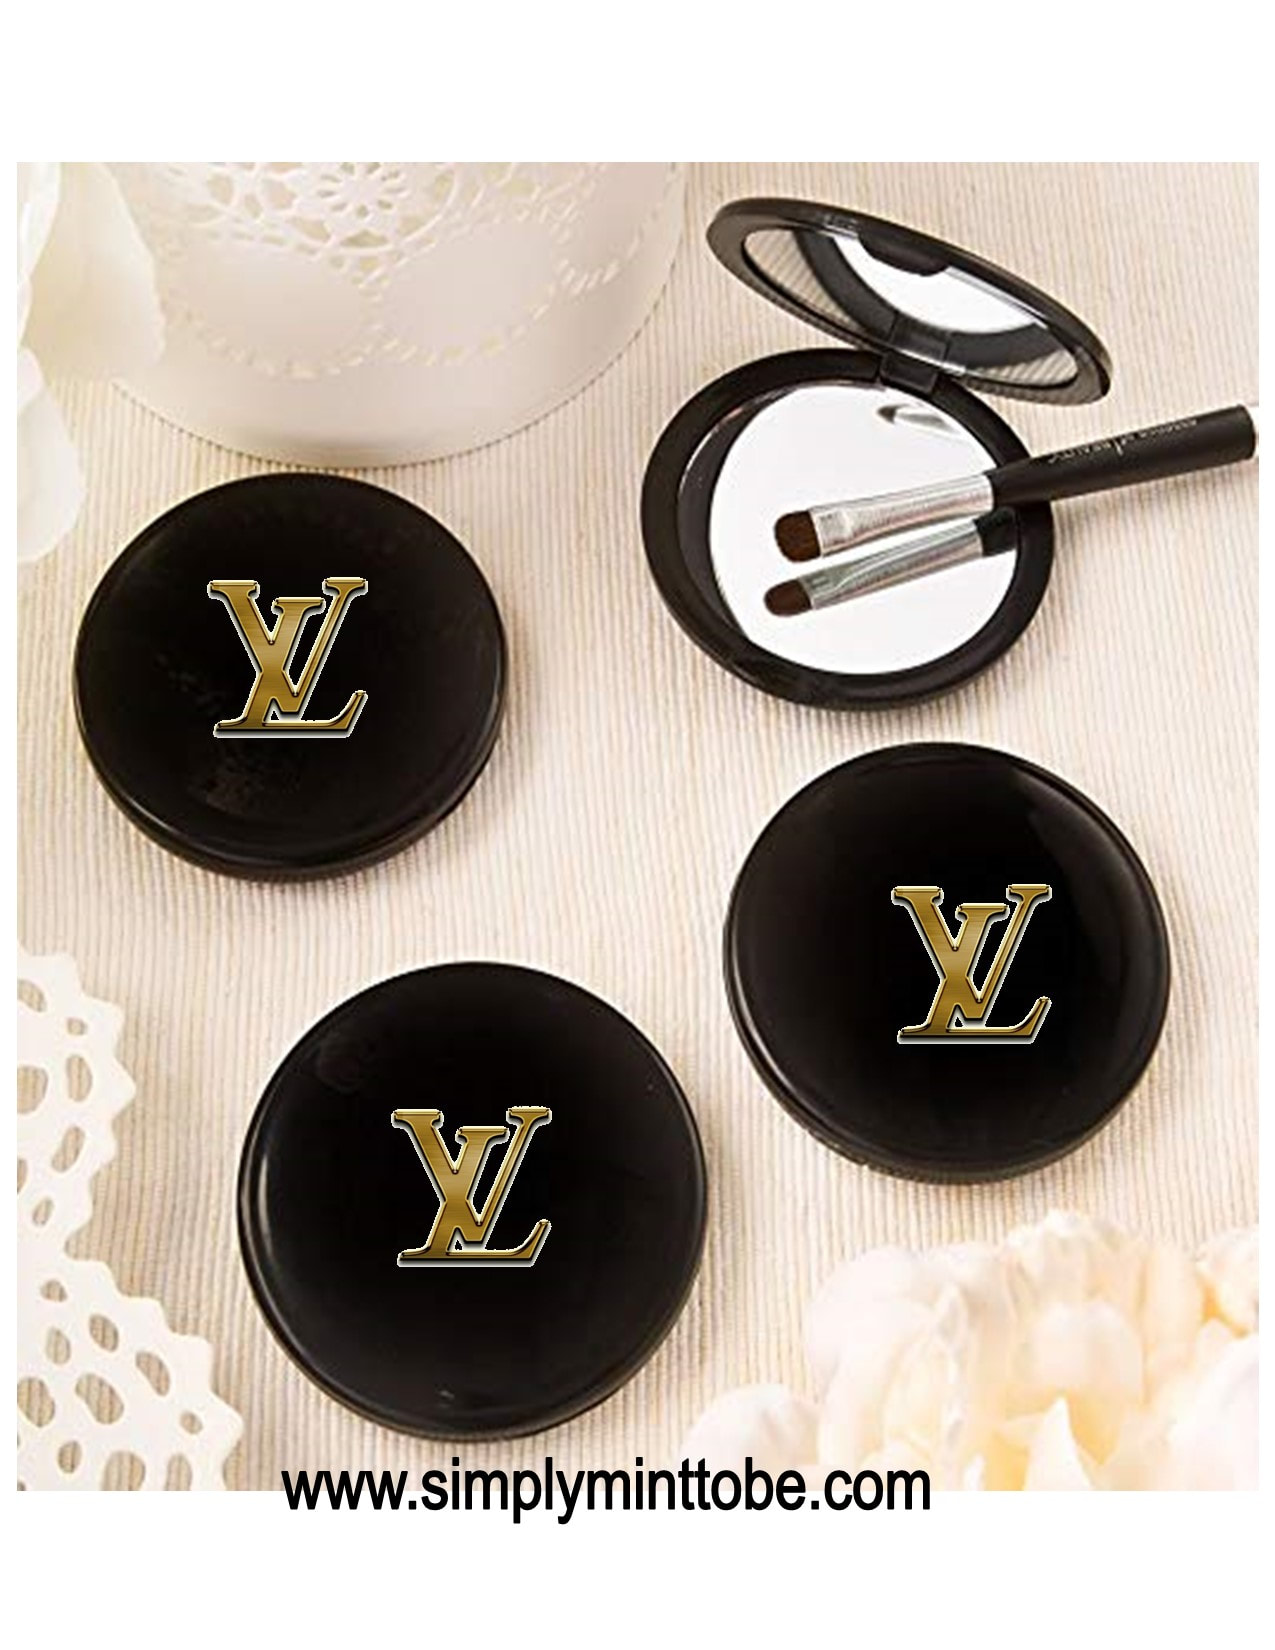 Louis Vuitton Inspired Black Compact Mirrors with Gold LV logo for all  occasions Sweet Sixteen, Weddings, Baby Showers, Birthdays, Bridal,  Quinceñera